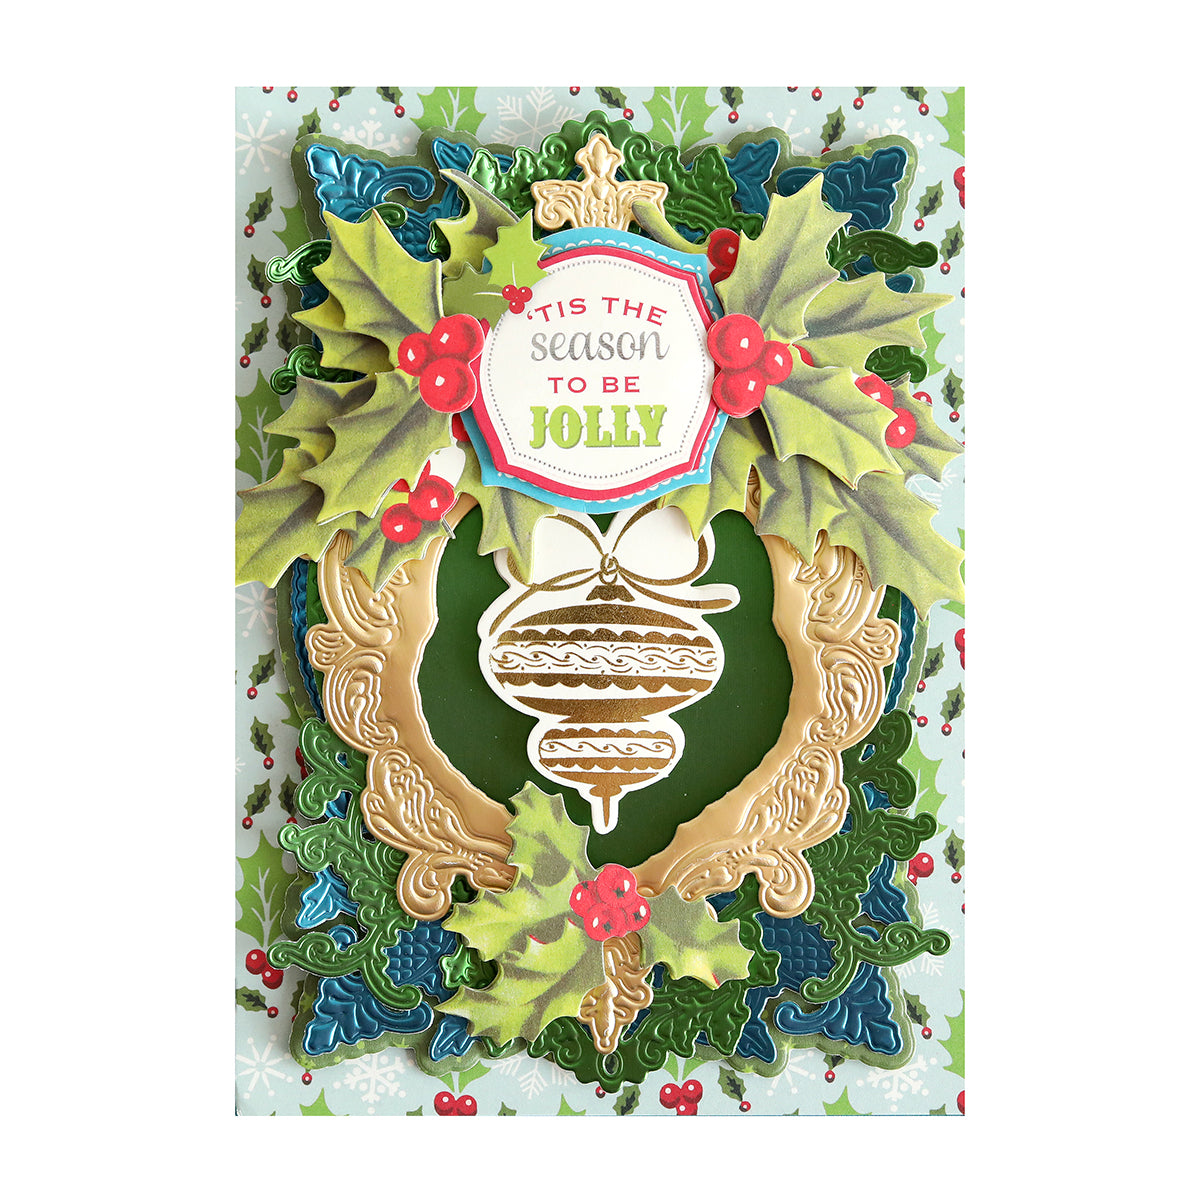 A festive Christmas card featuring the Retro Holly Sticker Bundle and holly leaves.